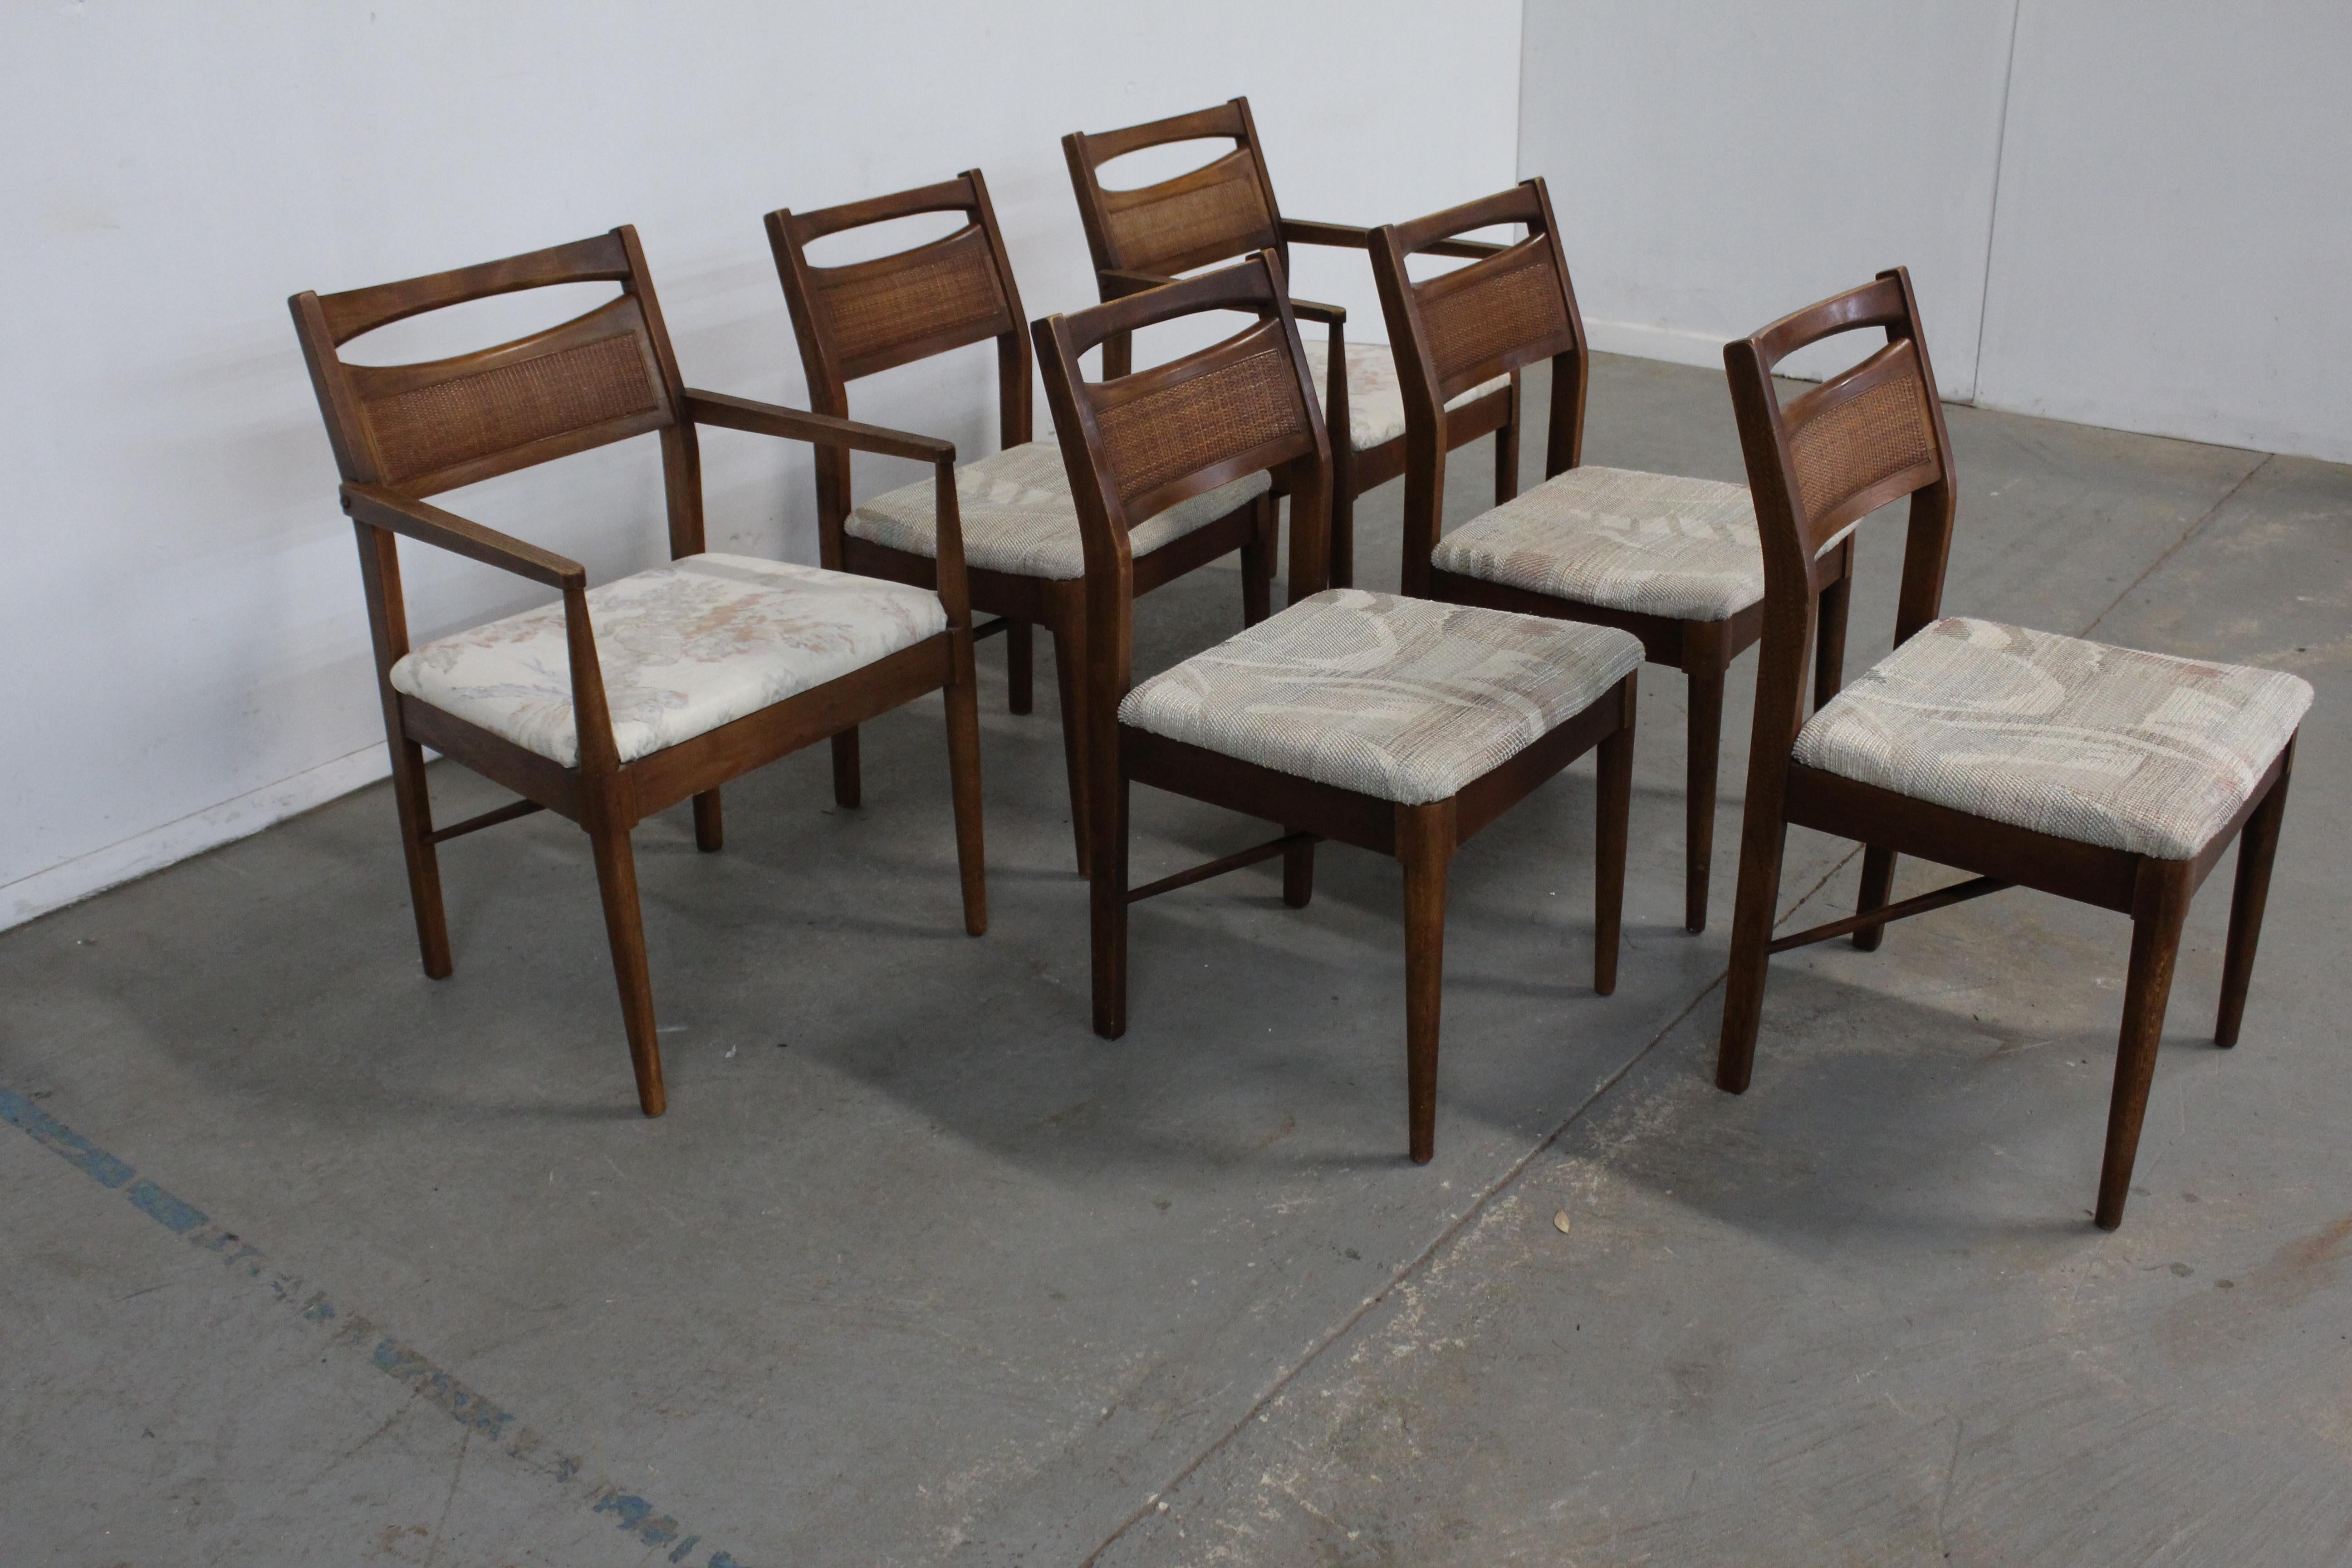 Set of 6 Mid-Century Modern American of Martinsville Walnut Dining Chairs
Offered is a Set of 6 Mid-Century Modern American of Martinsville Walnut Dining Chairs. Designed by Merton Gershun. This set includes 4 side chairs and 2 arm chairs. They are